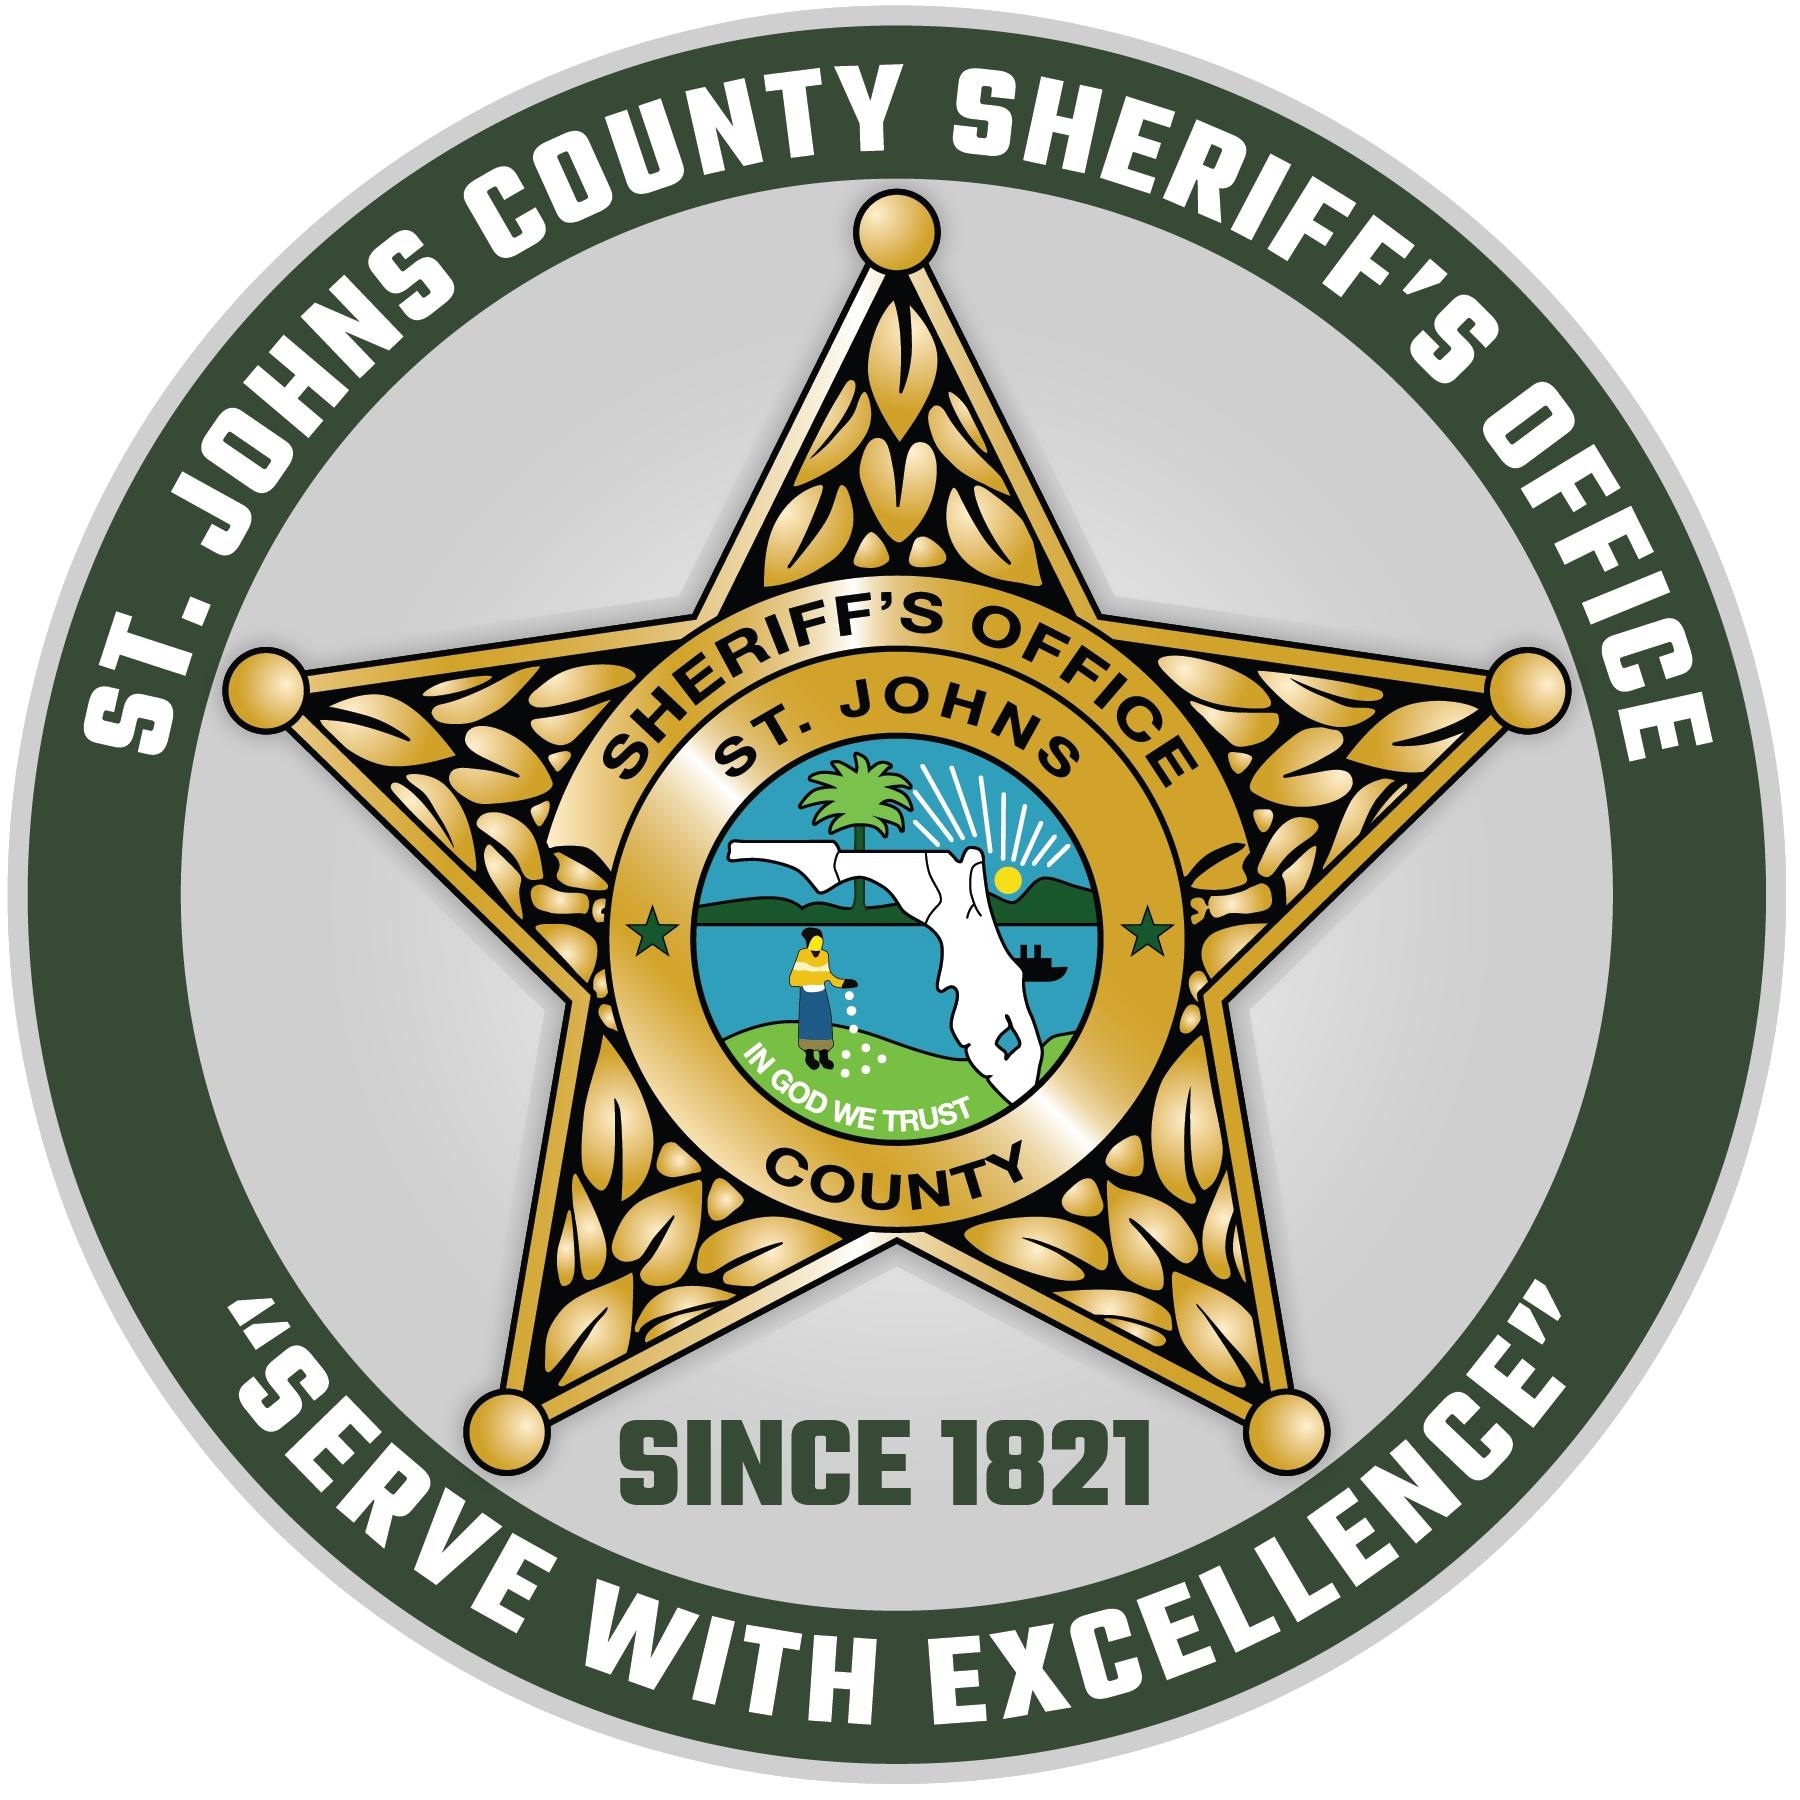 Official patch of the St. John's County Sheriff's Office in Florida